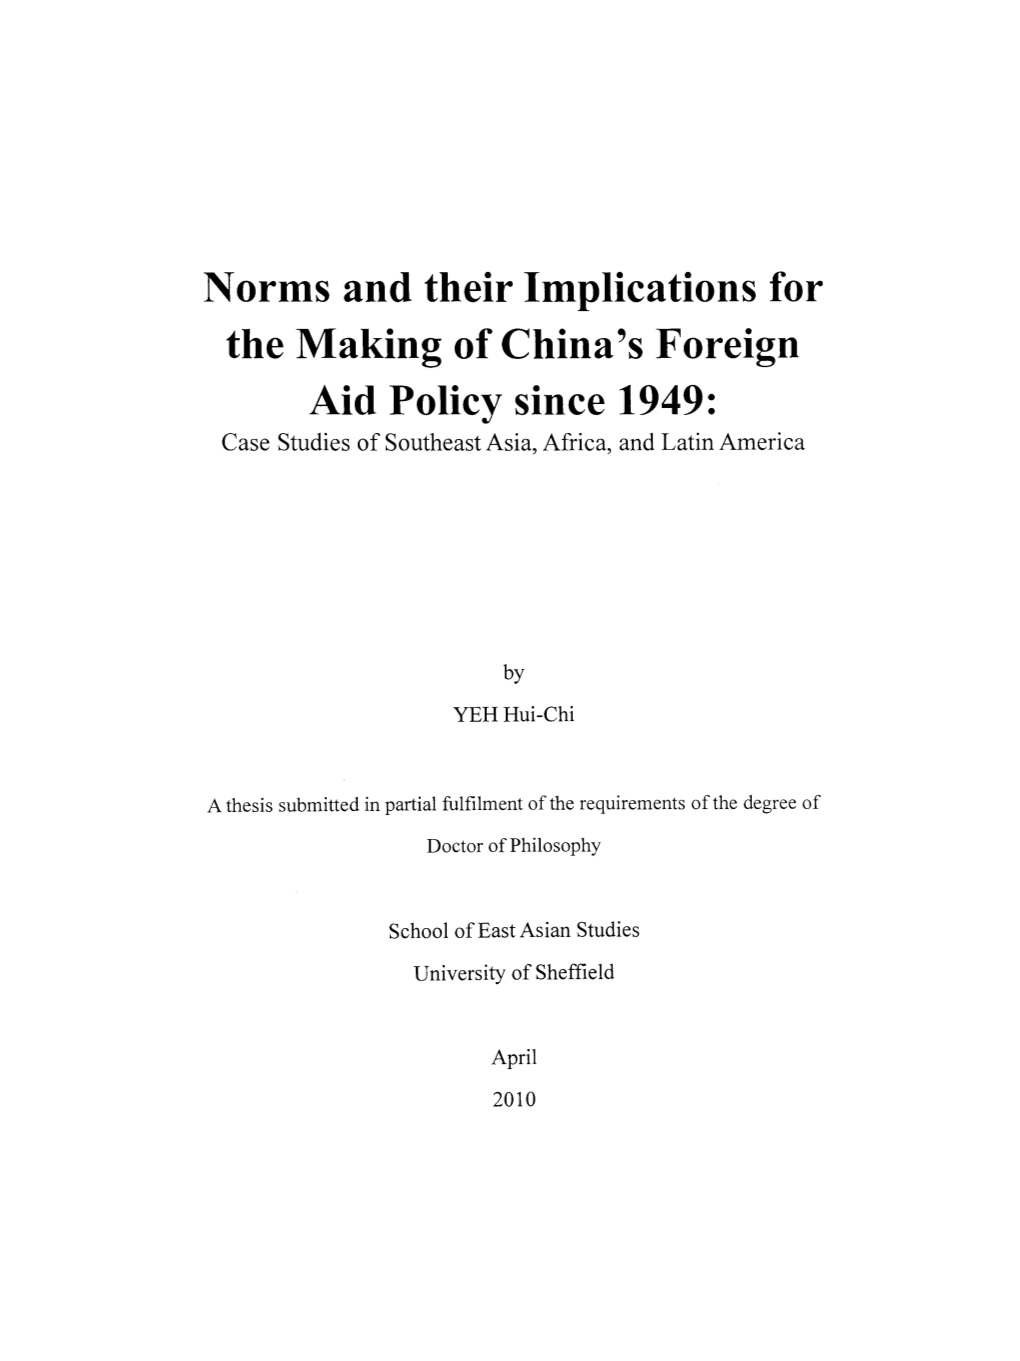 Norms and Their Implications for the Making of China's Foreign Aid Policy Since 1949: Case Studies of Southeast Asia, Africa, and Latin America